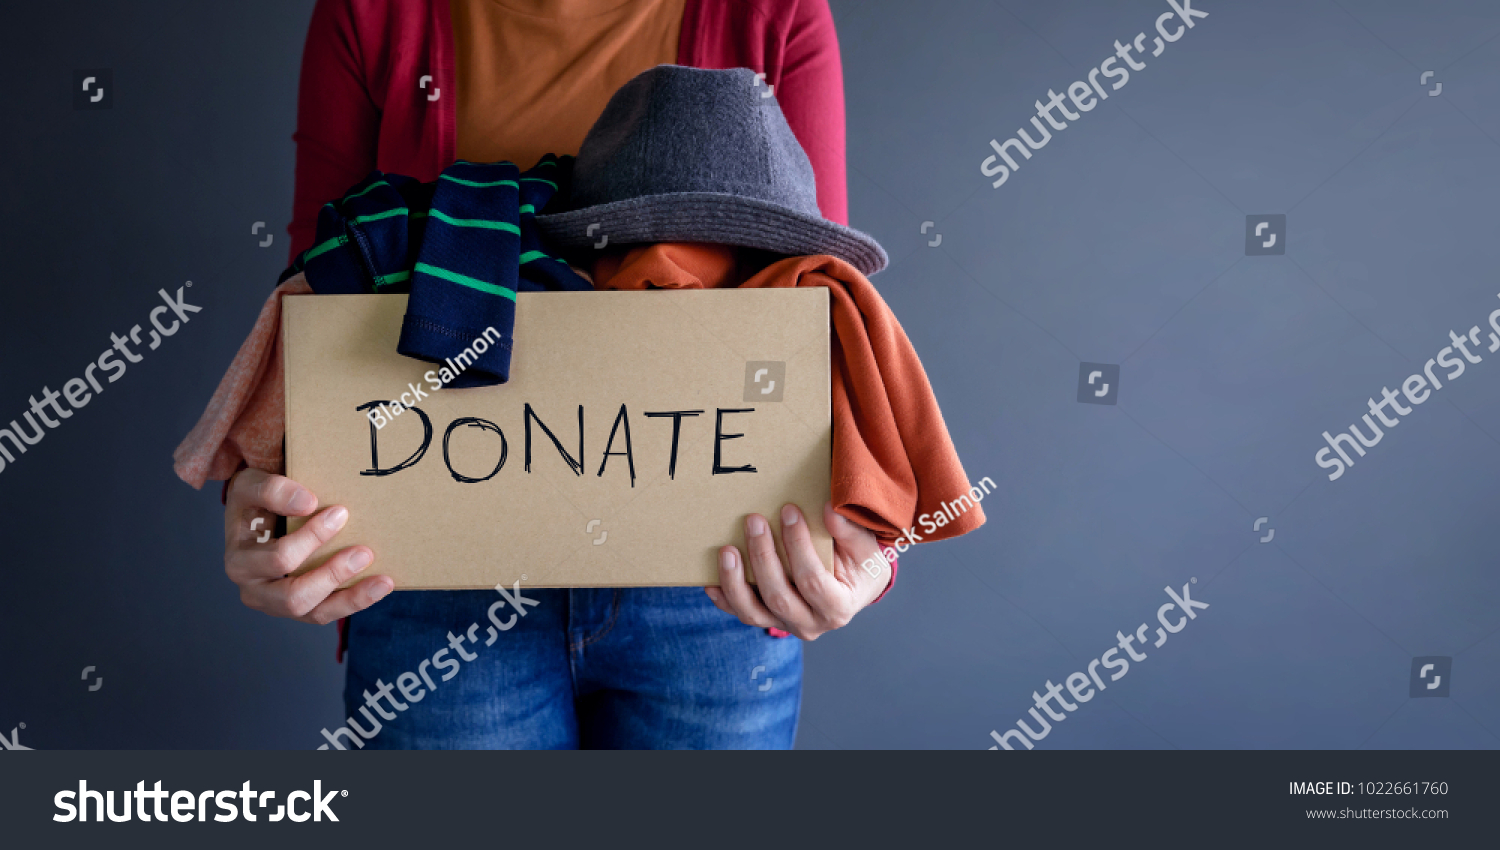 Donation Concept. Woman holding a Donate Box with full of Clothes #1022661760